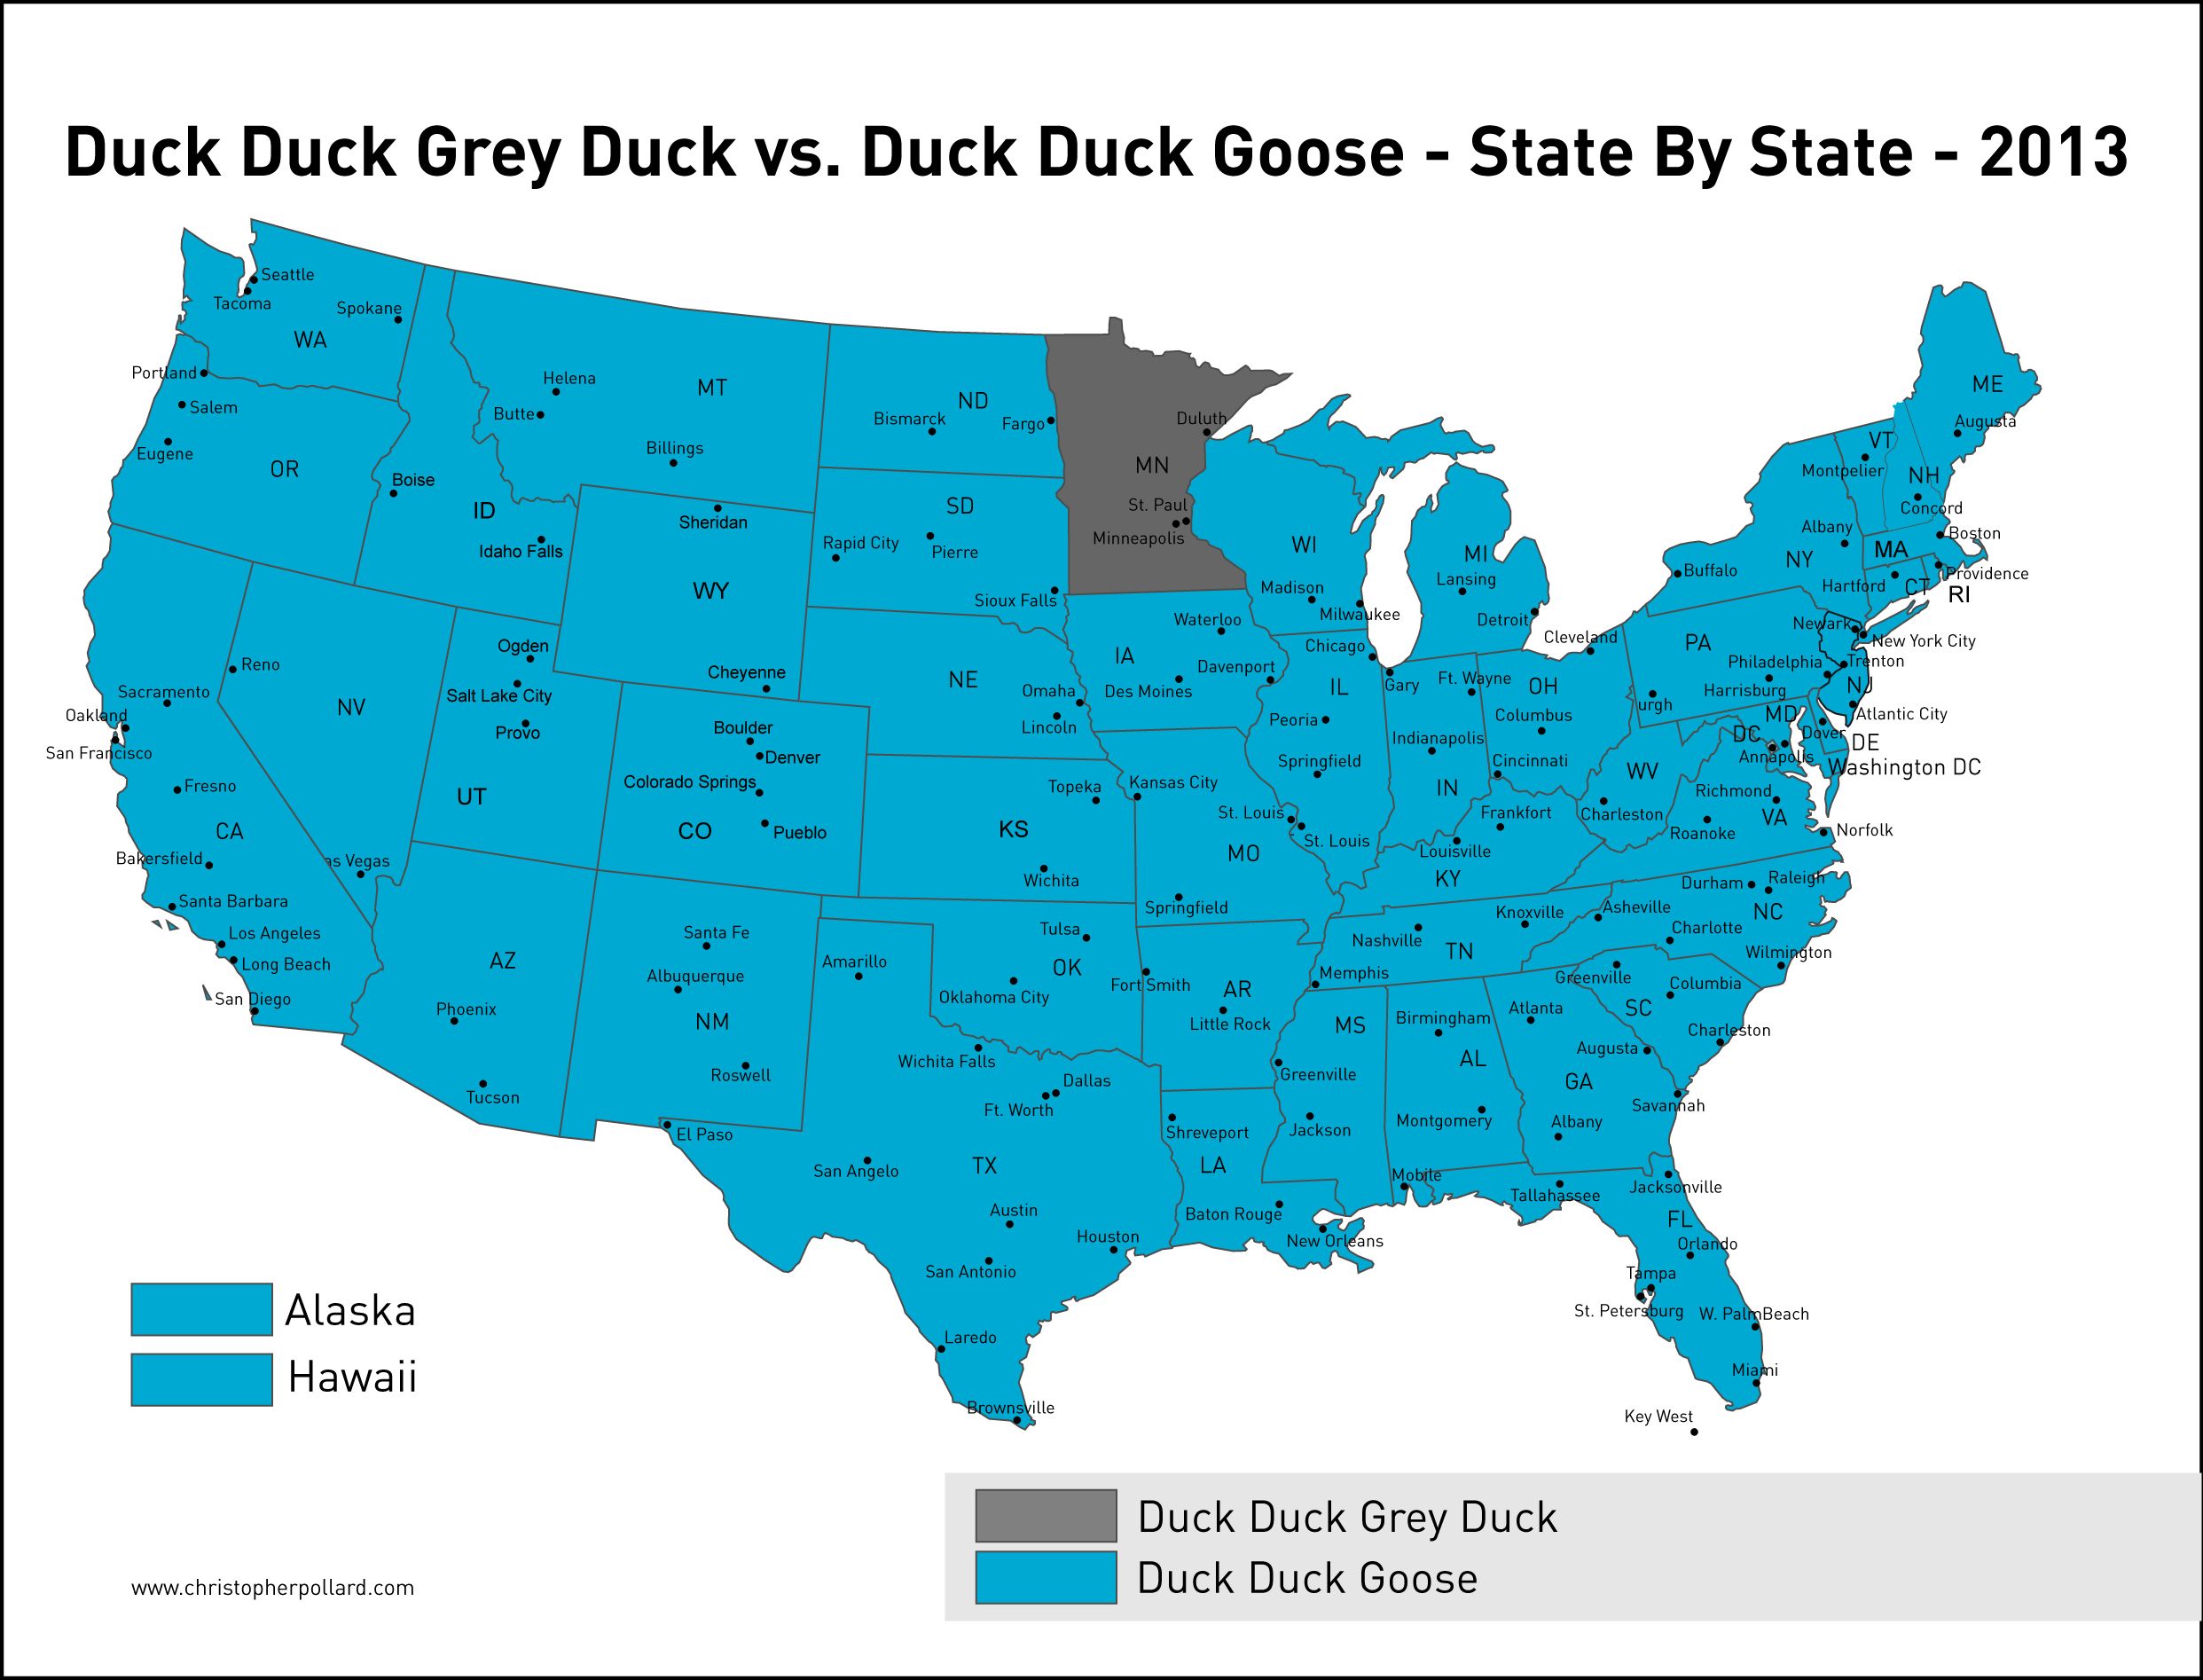 Just a reminder that Minnesota plays Duck Duck Grey Duck like a bunch of maniacs